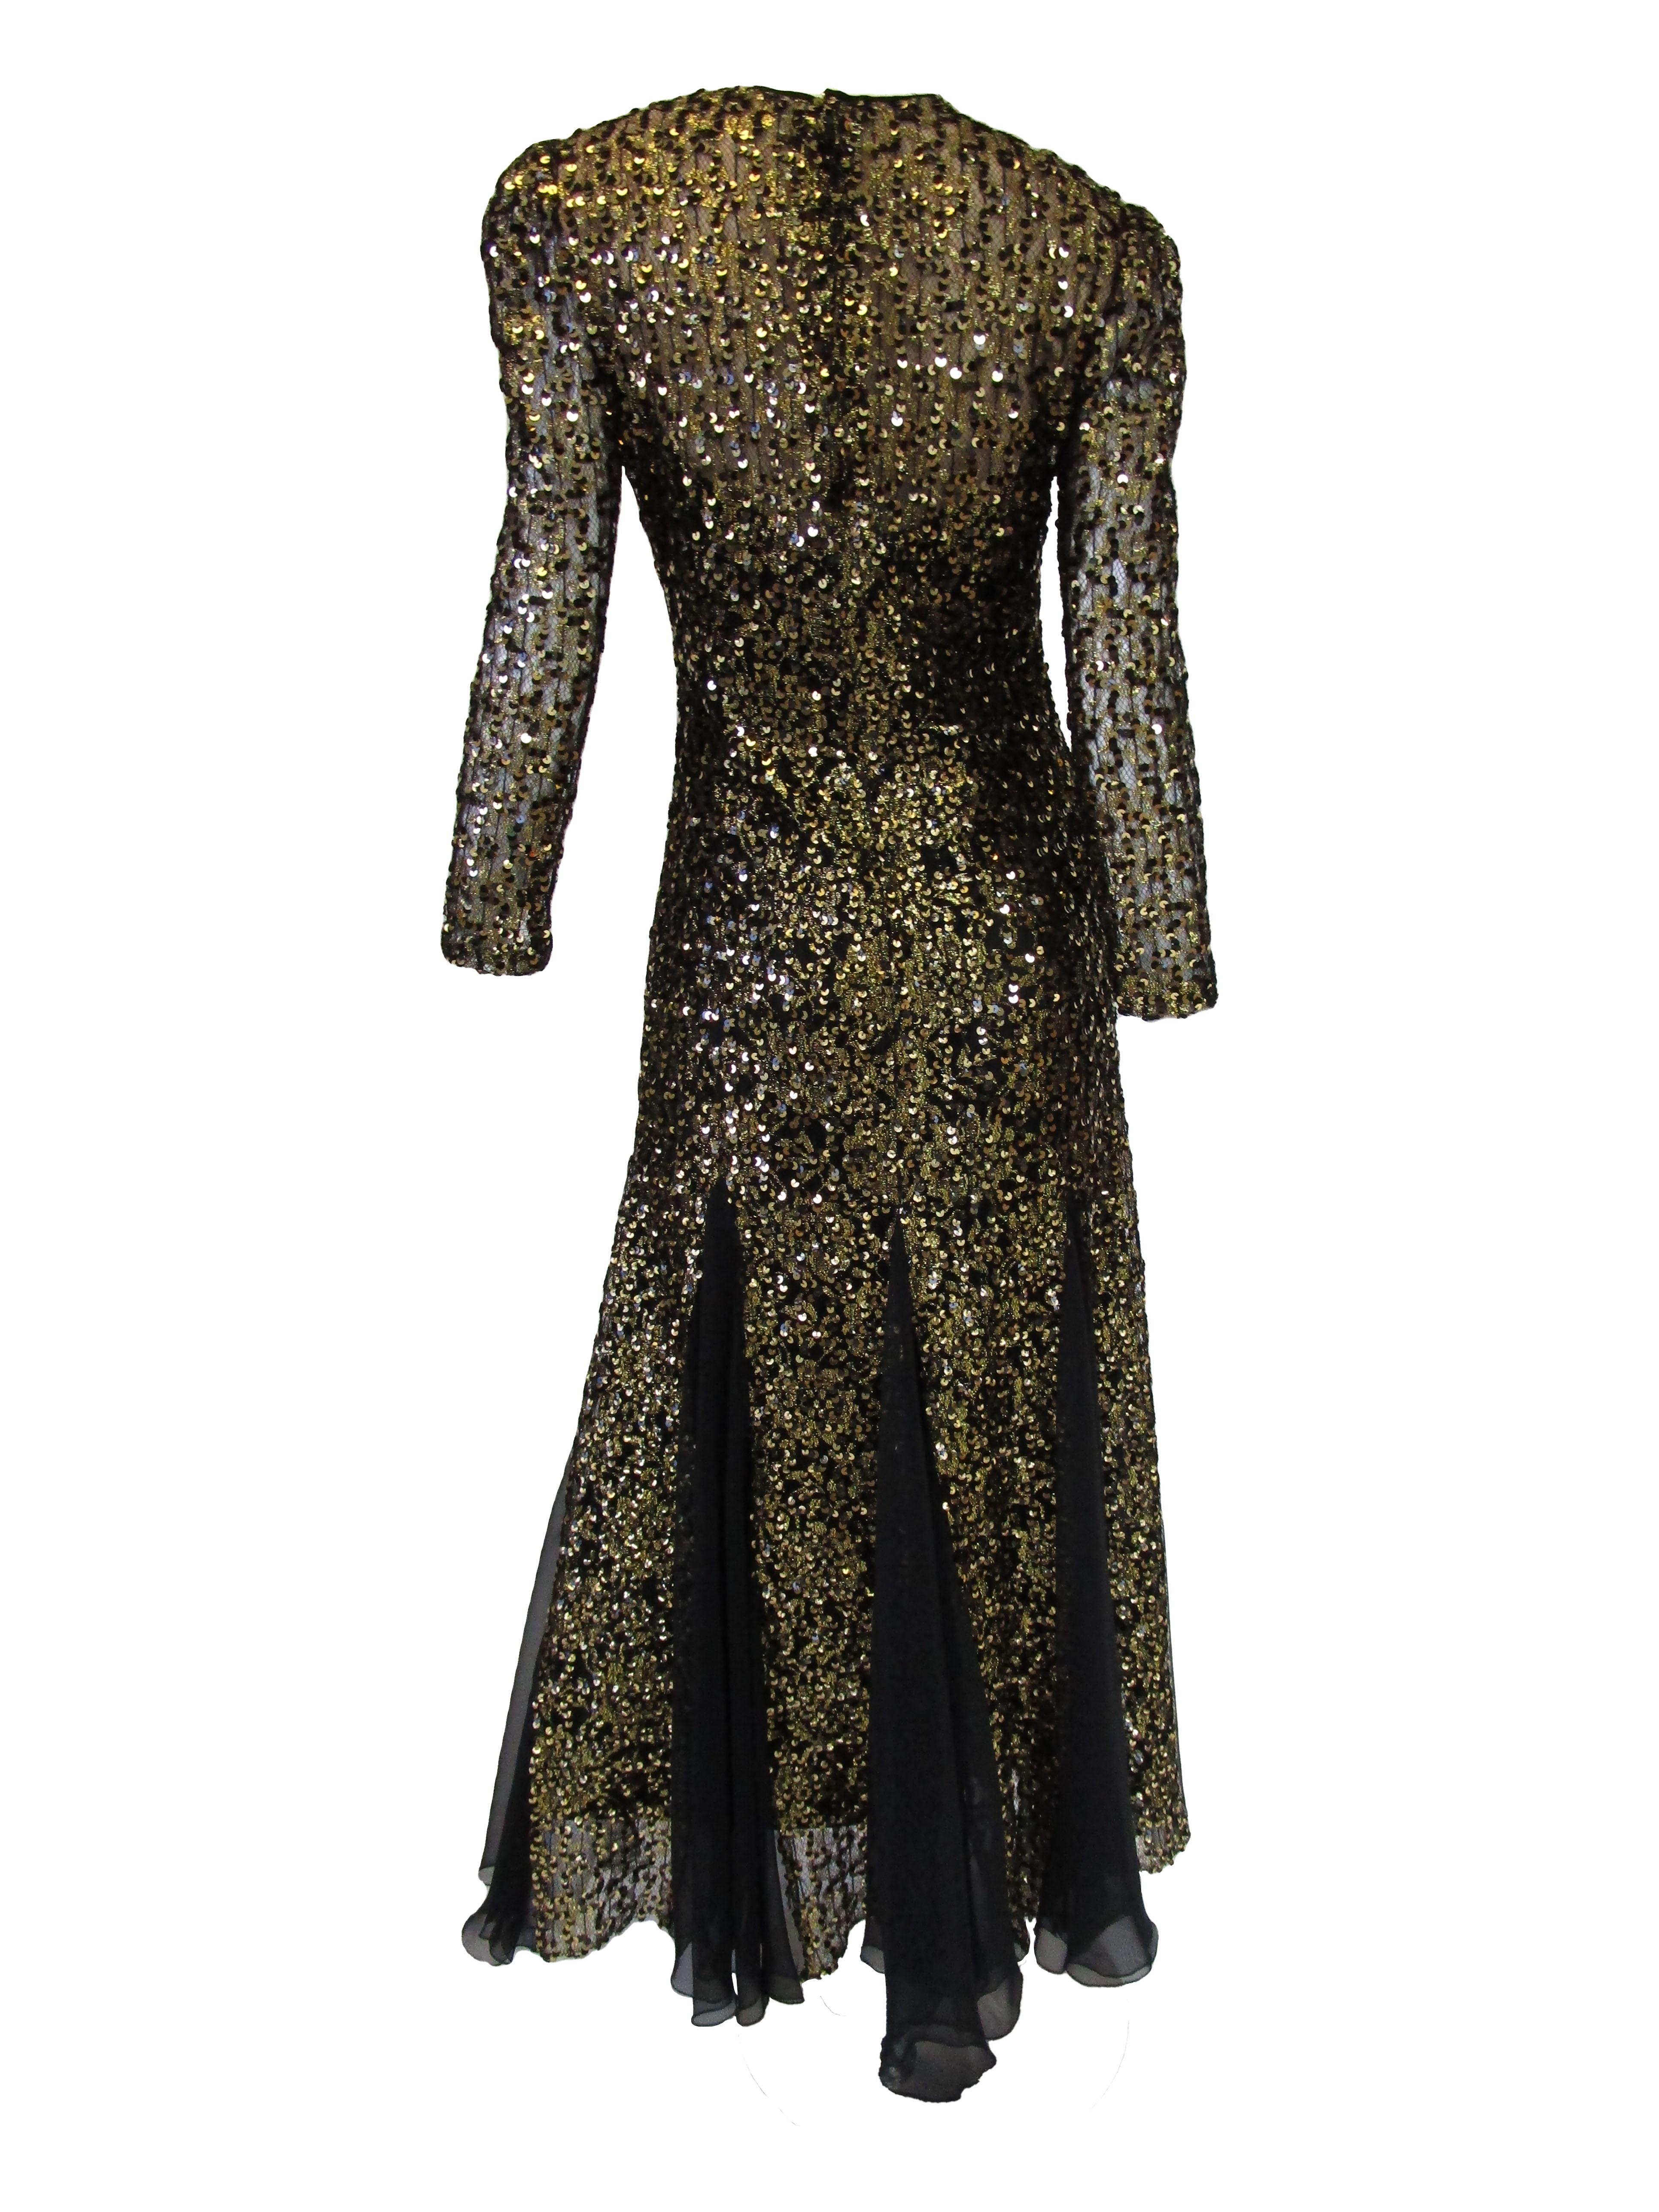 1980s Richilene Black and Gold Sequined Evening Dress  For Sale 2